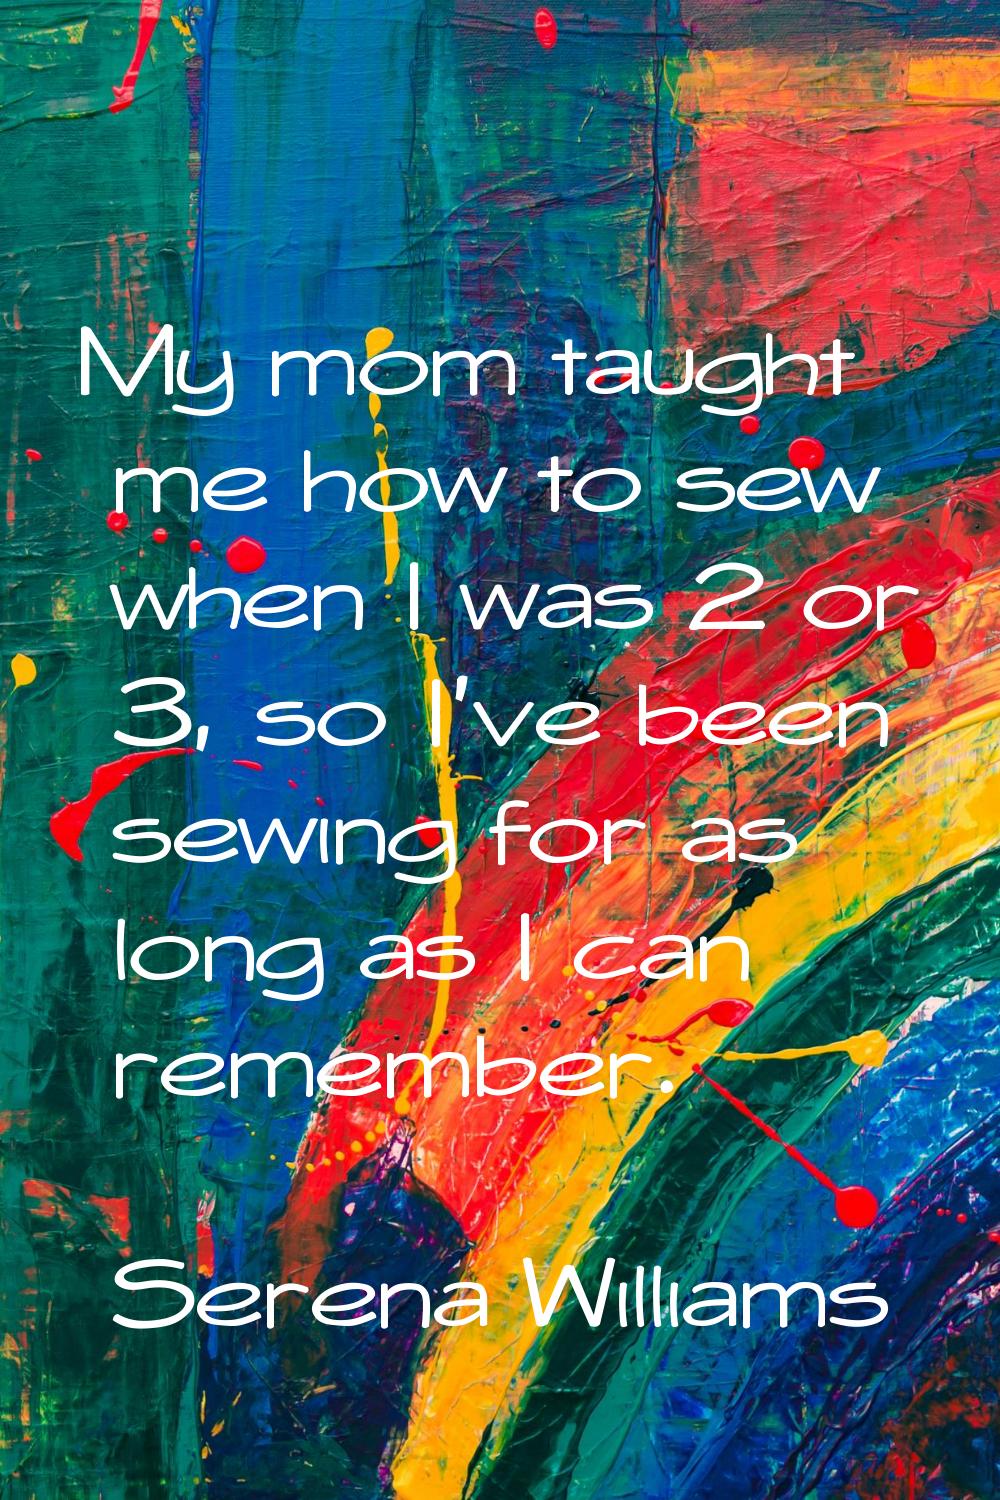 My mom taught me how to sew when I was 2 or 3, so I've been sewing for as long as I can remember.